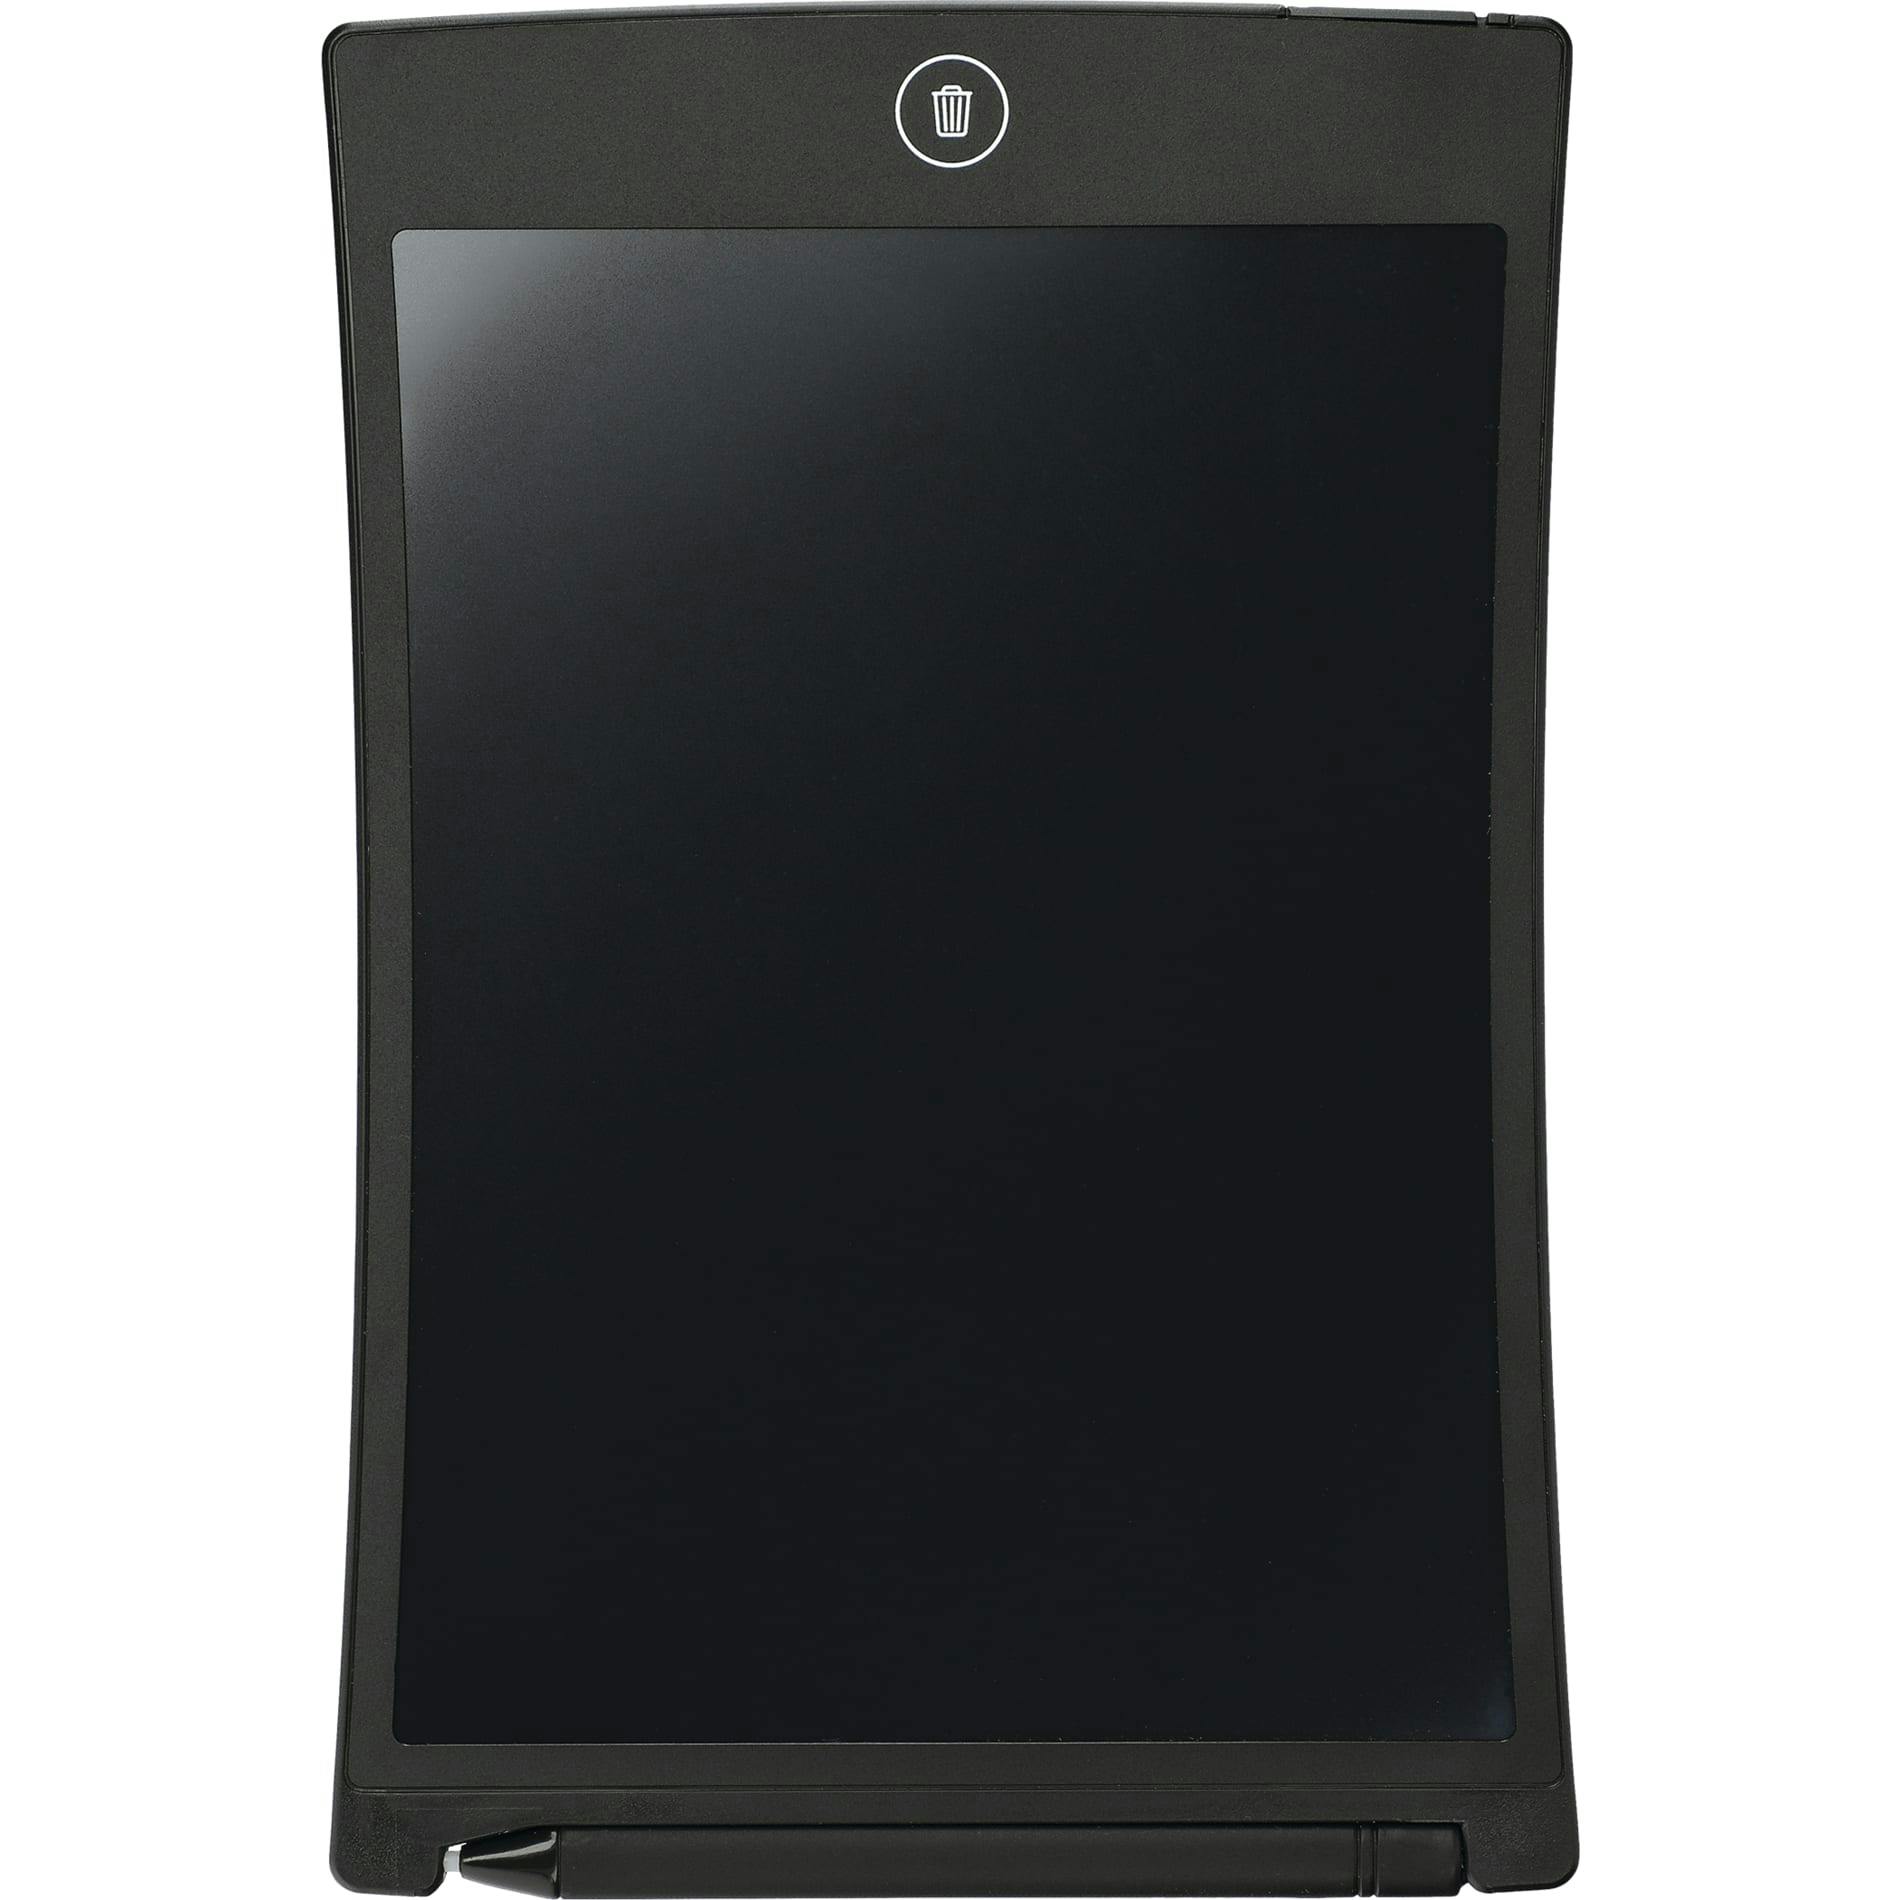 8.5" LCD e-Writing & Drawing Tablet - additional Image 3